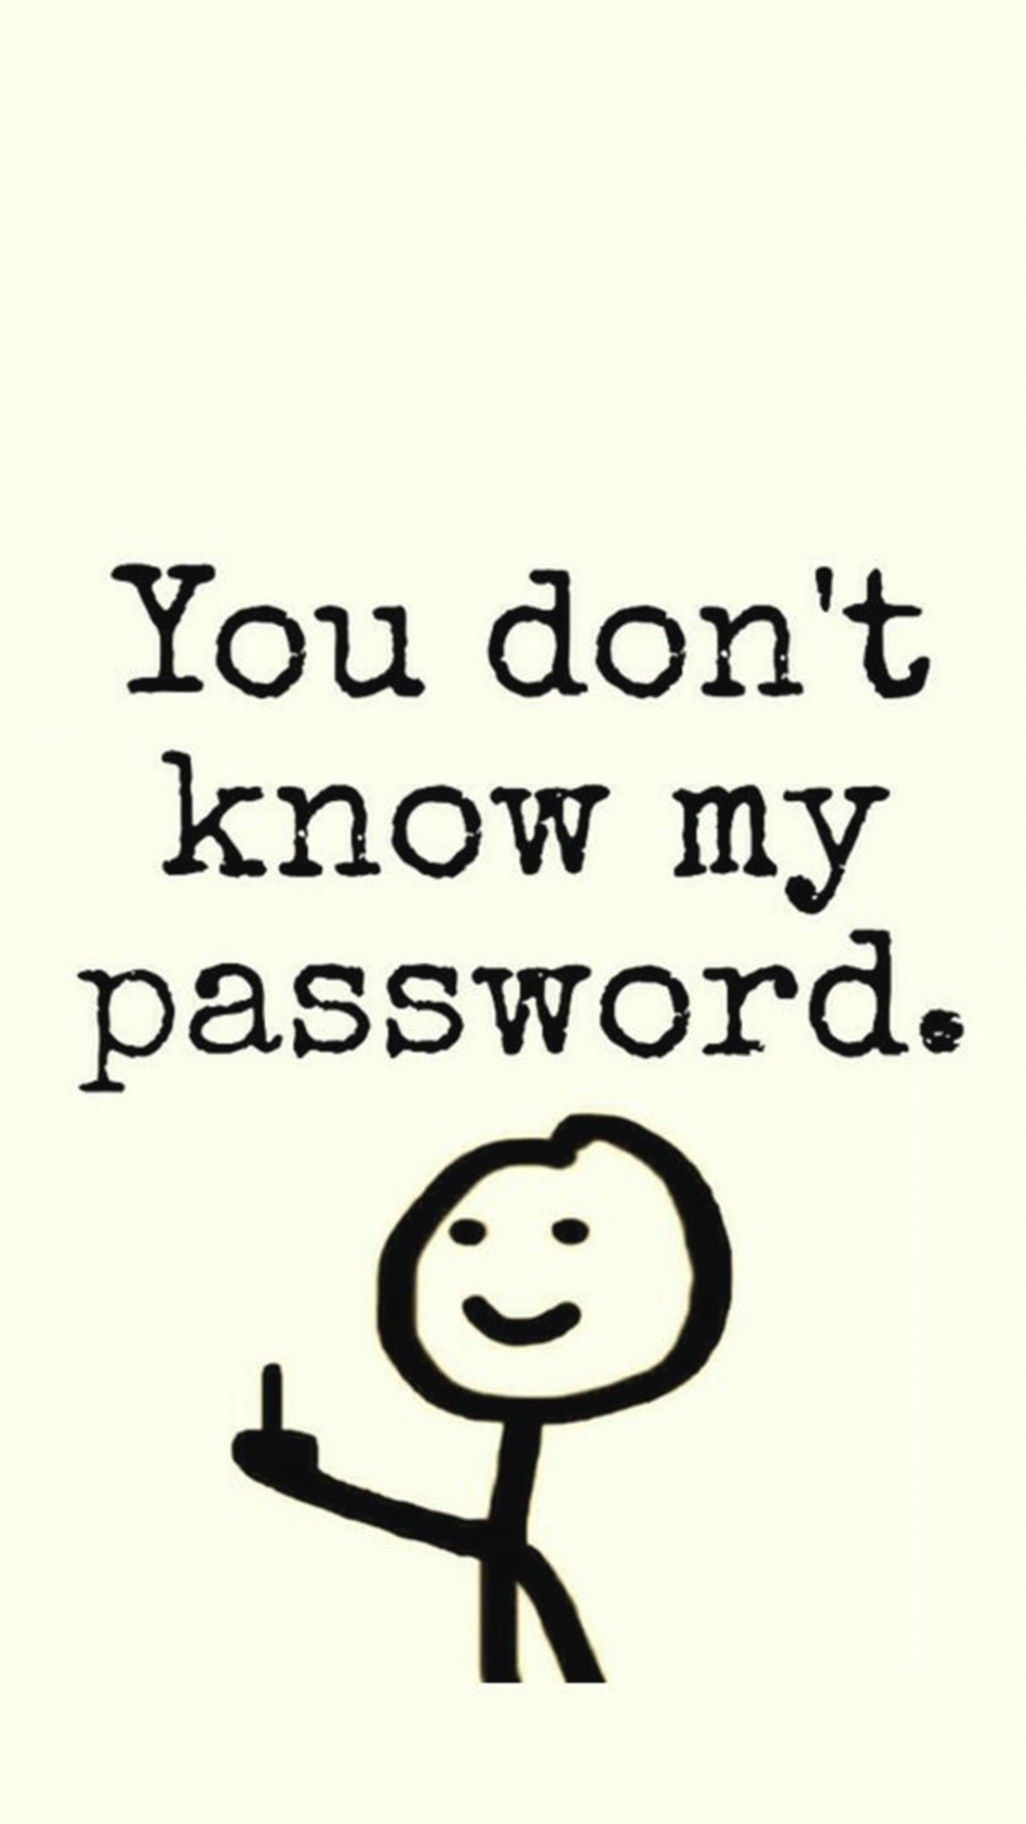 you don't know my password | mobile9 with wallpaper you don't know